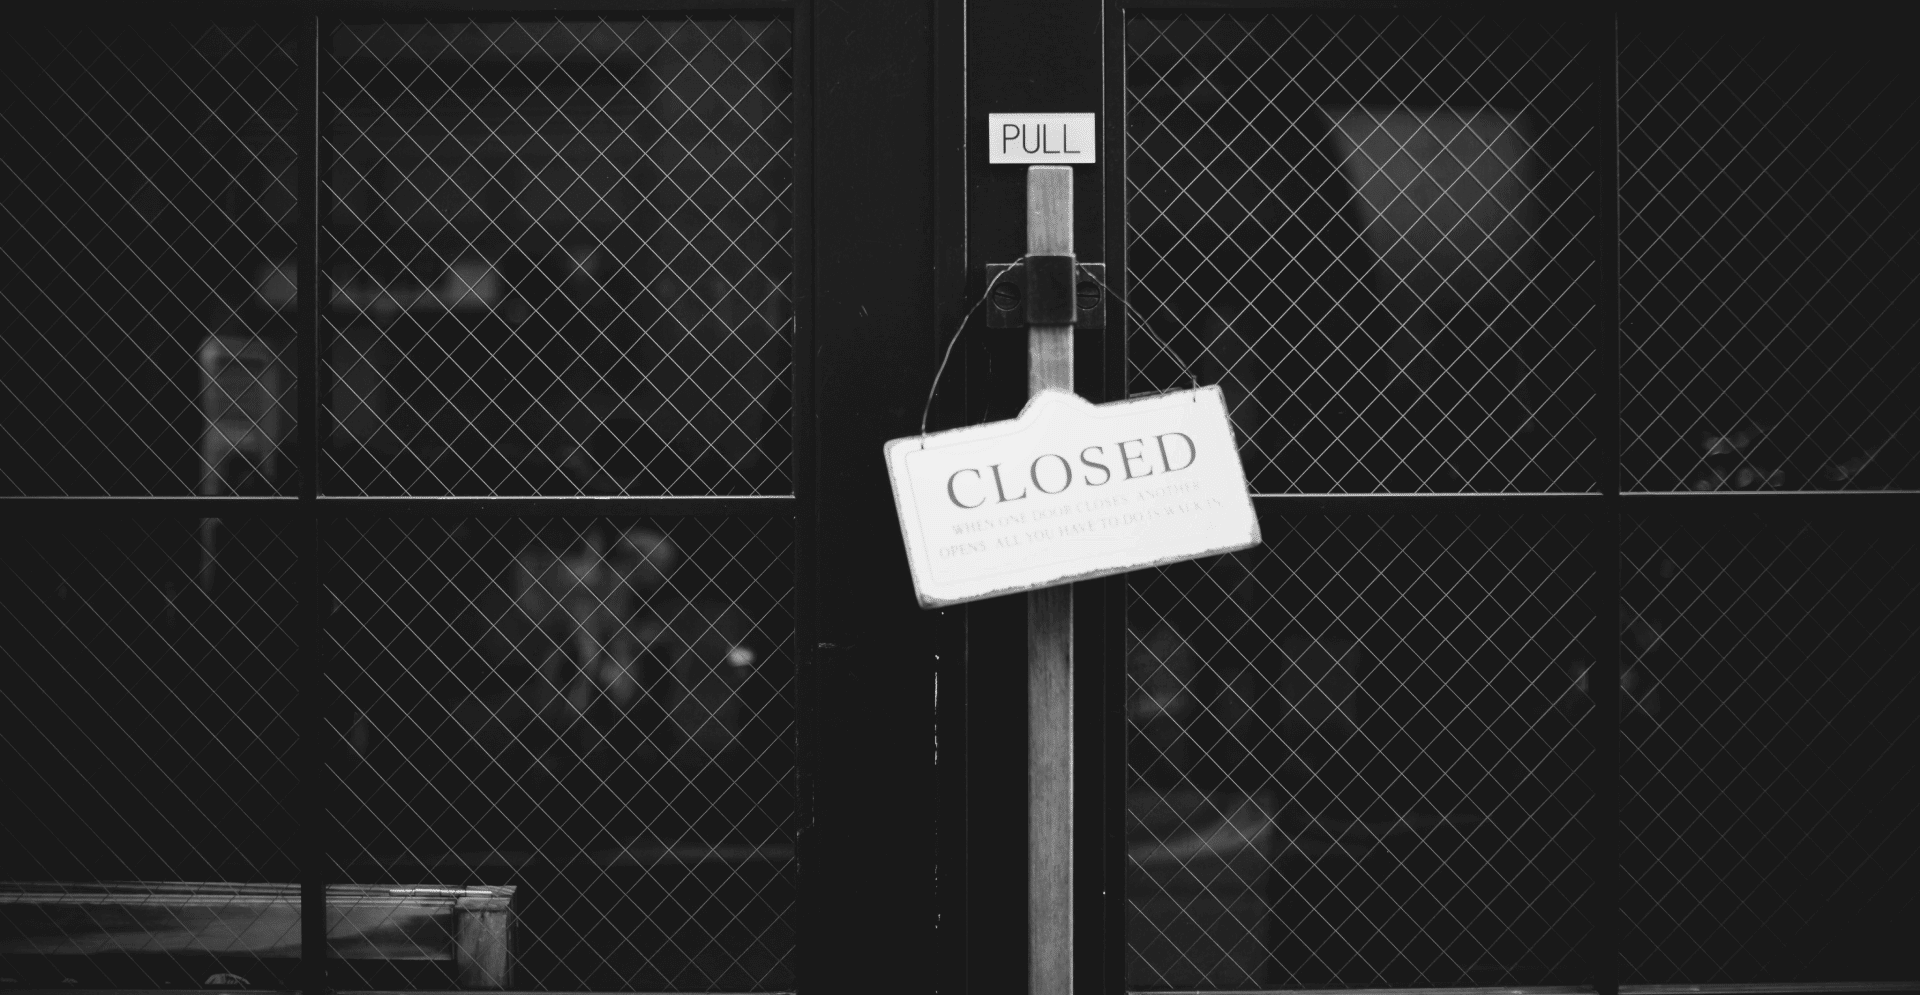 This image of a closed gate highlights the article's topic of discussion: ecommerce takedowns, and the obstacles and solutions therein.